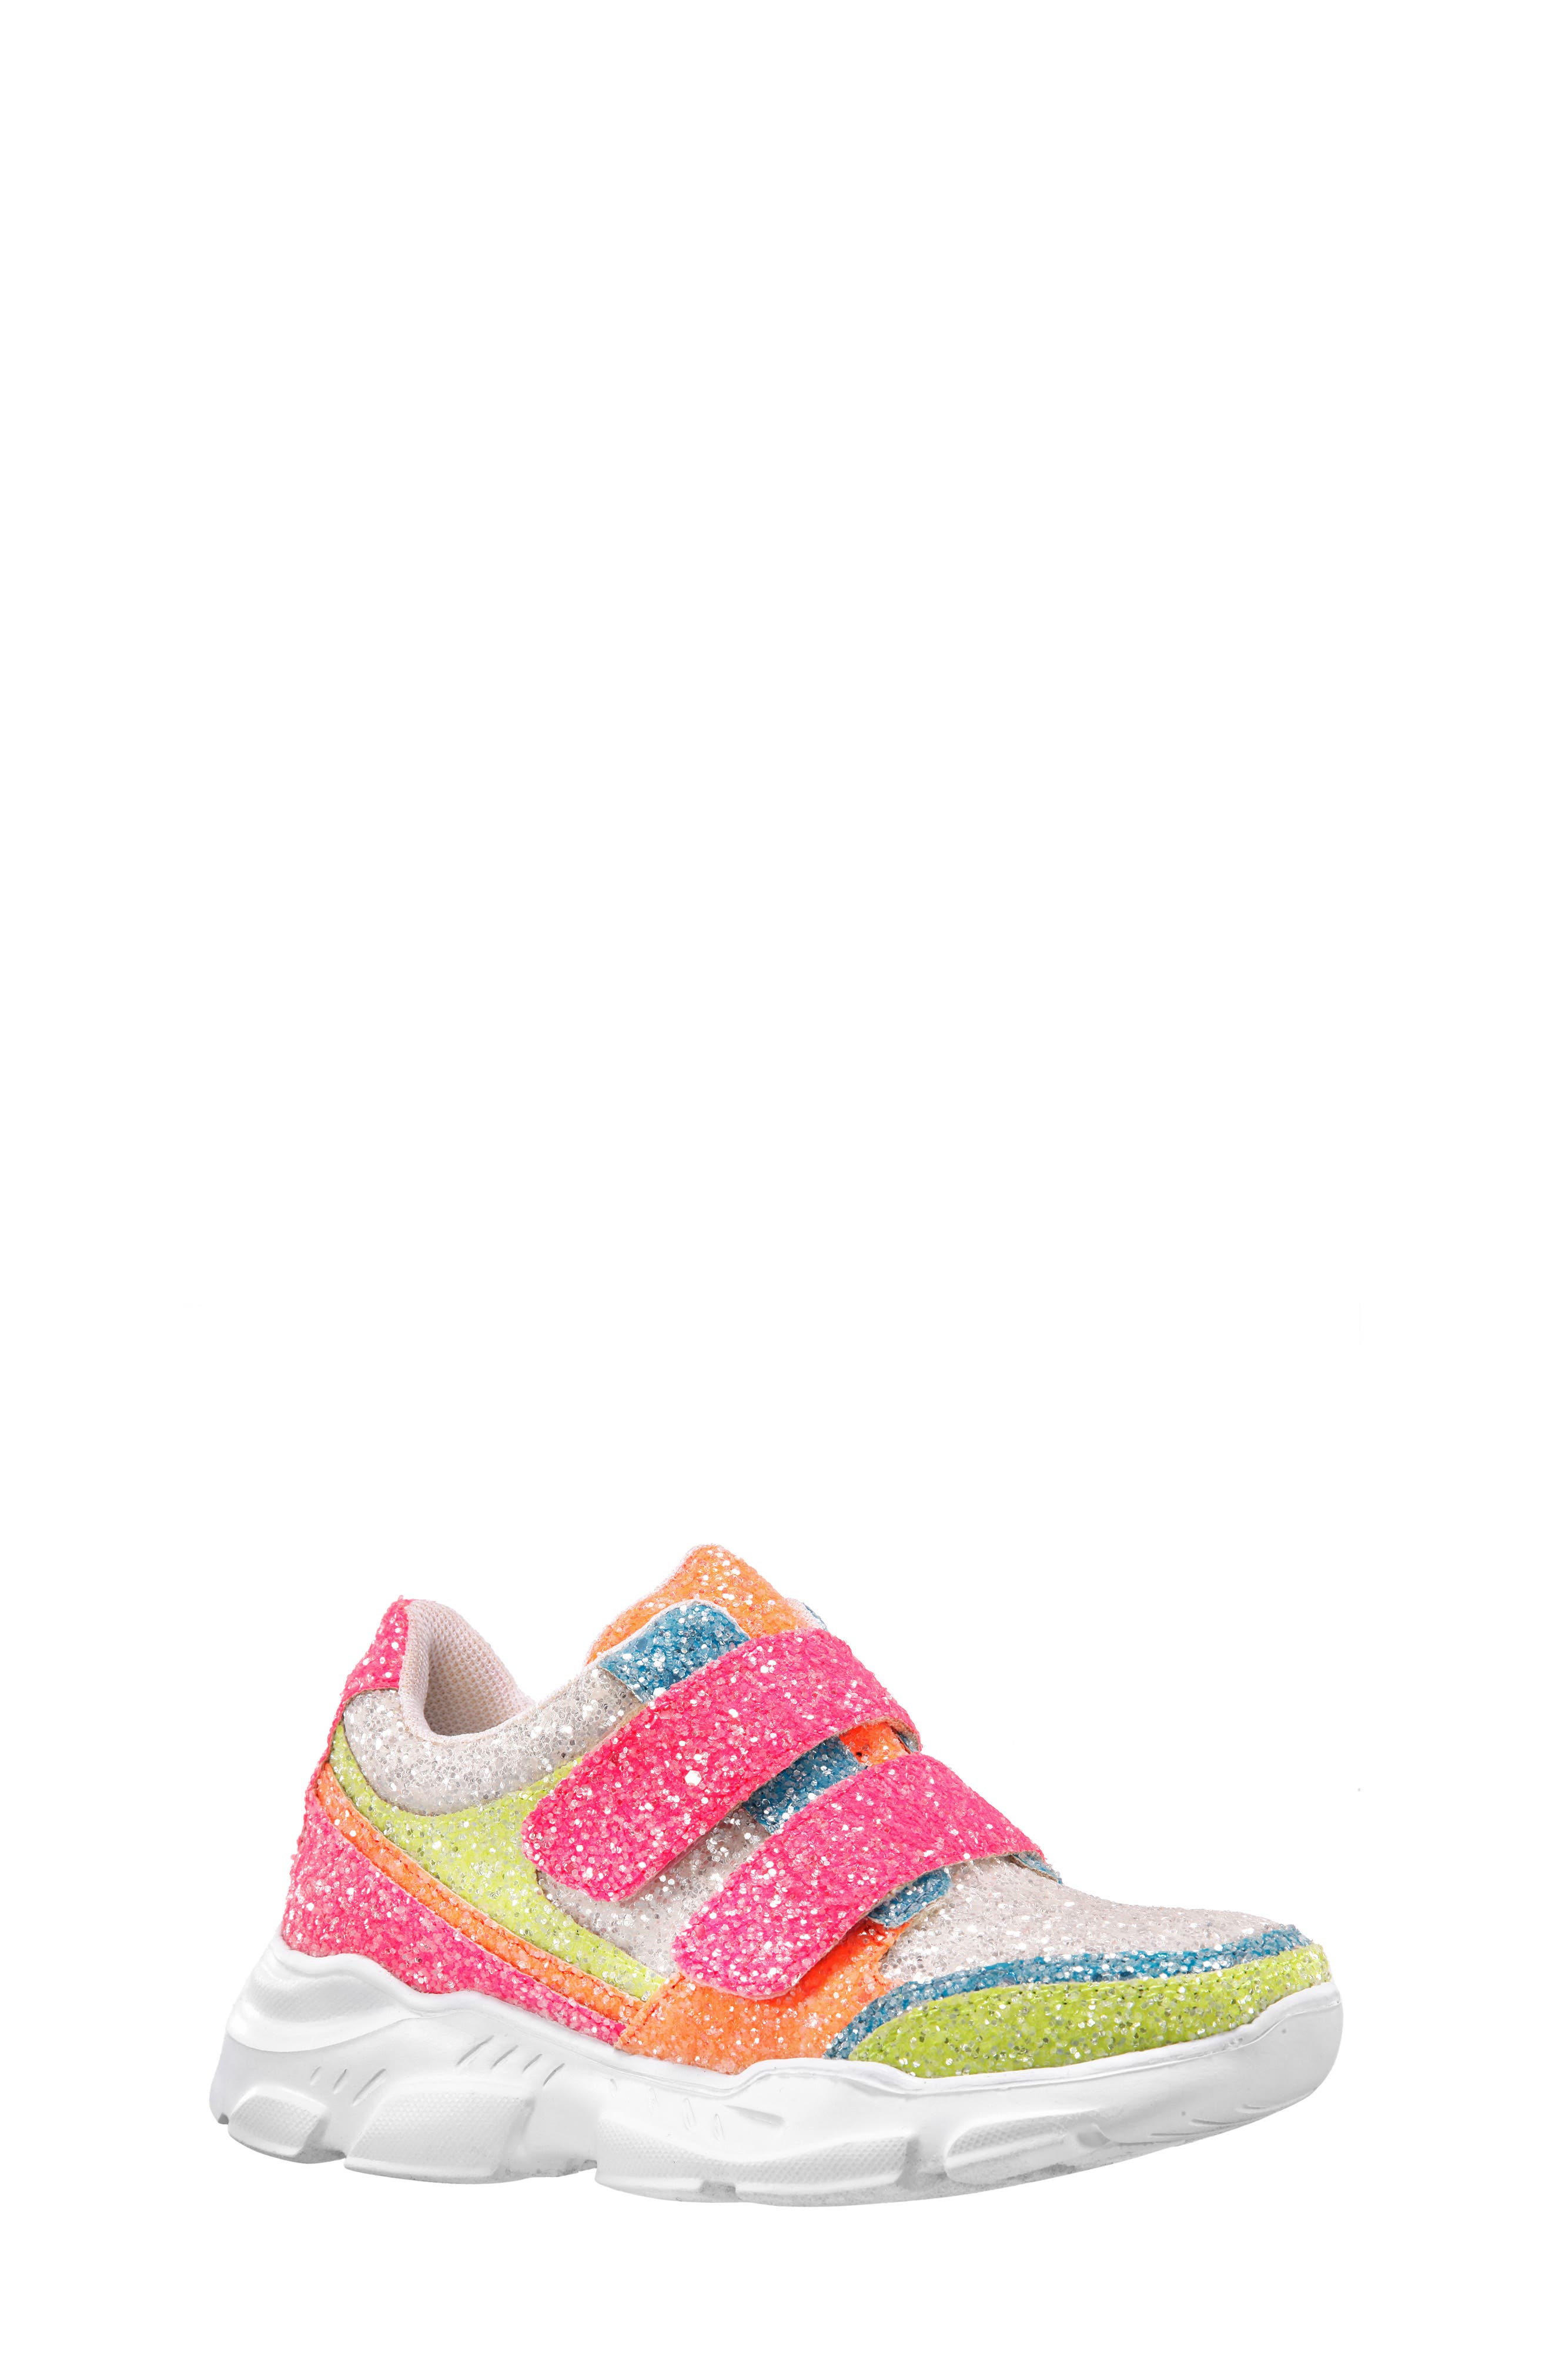 UPC 794378433248 product image for Girl's Nina Holleigh Glitter Sneaker, Size 2 M - Pink | upcitemdb.com